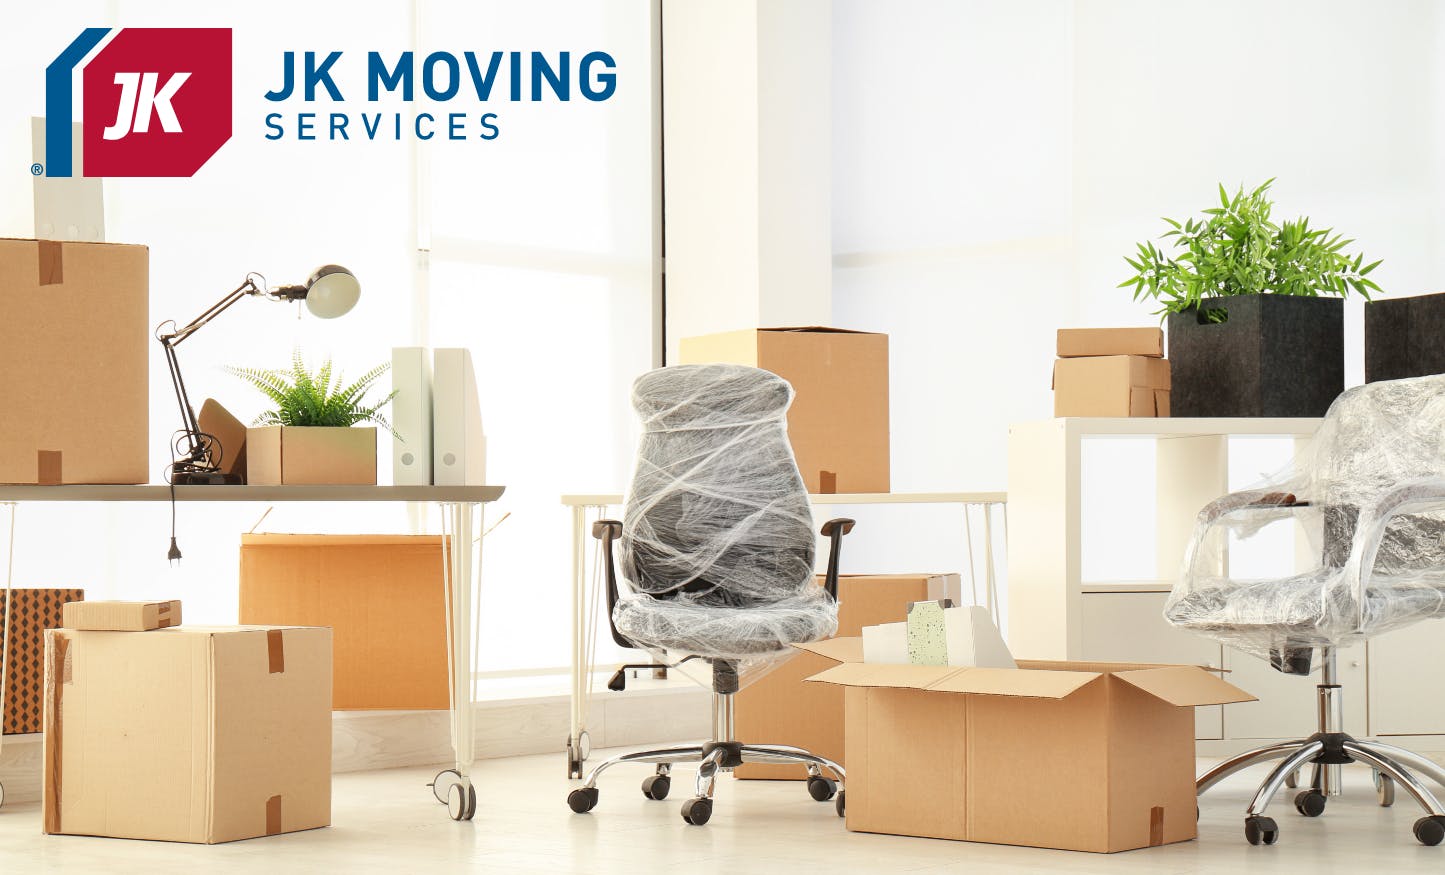 JK Moving Services: World-Leading Mover Services Review